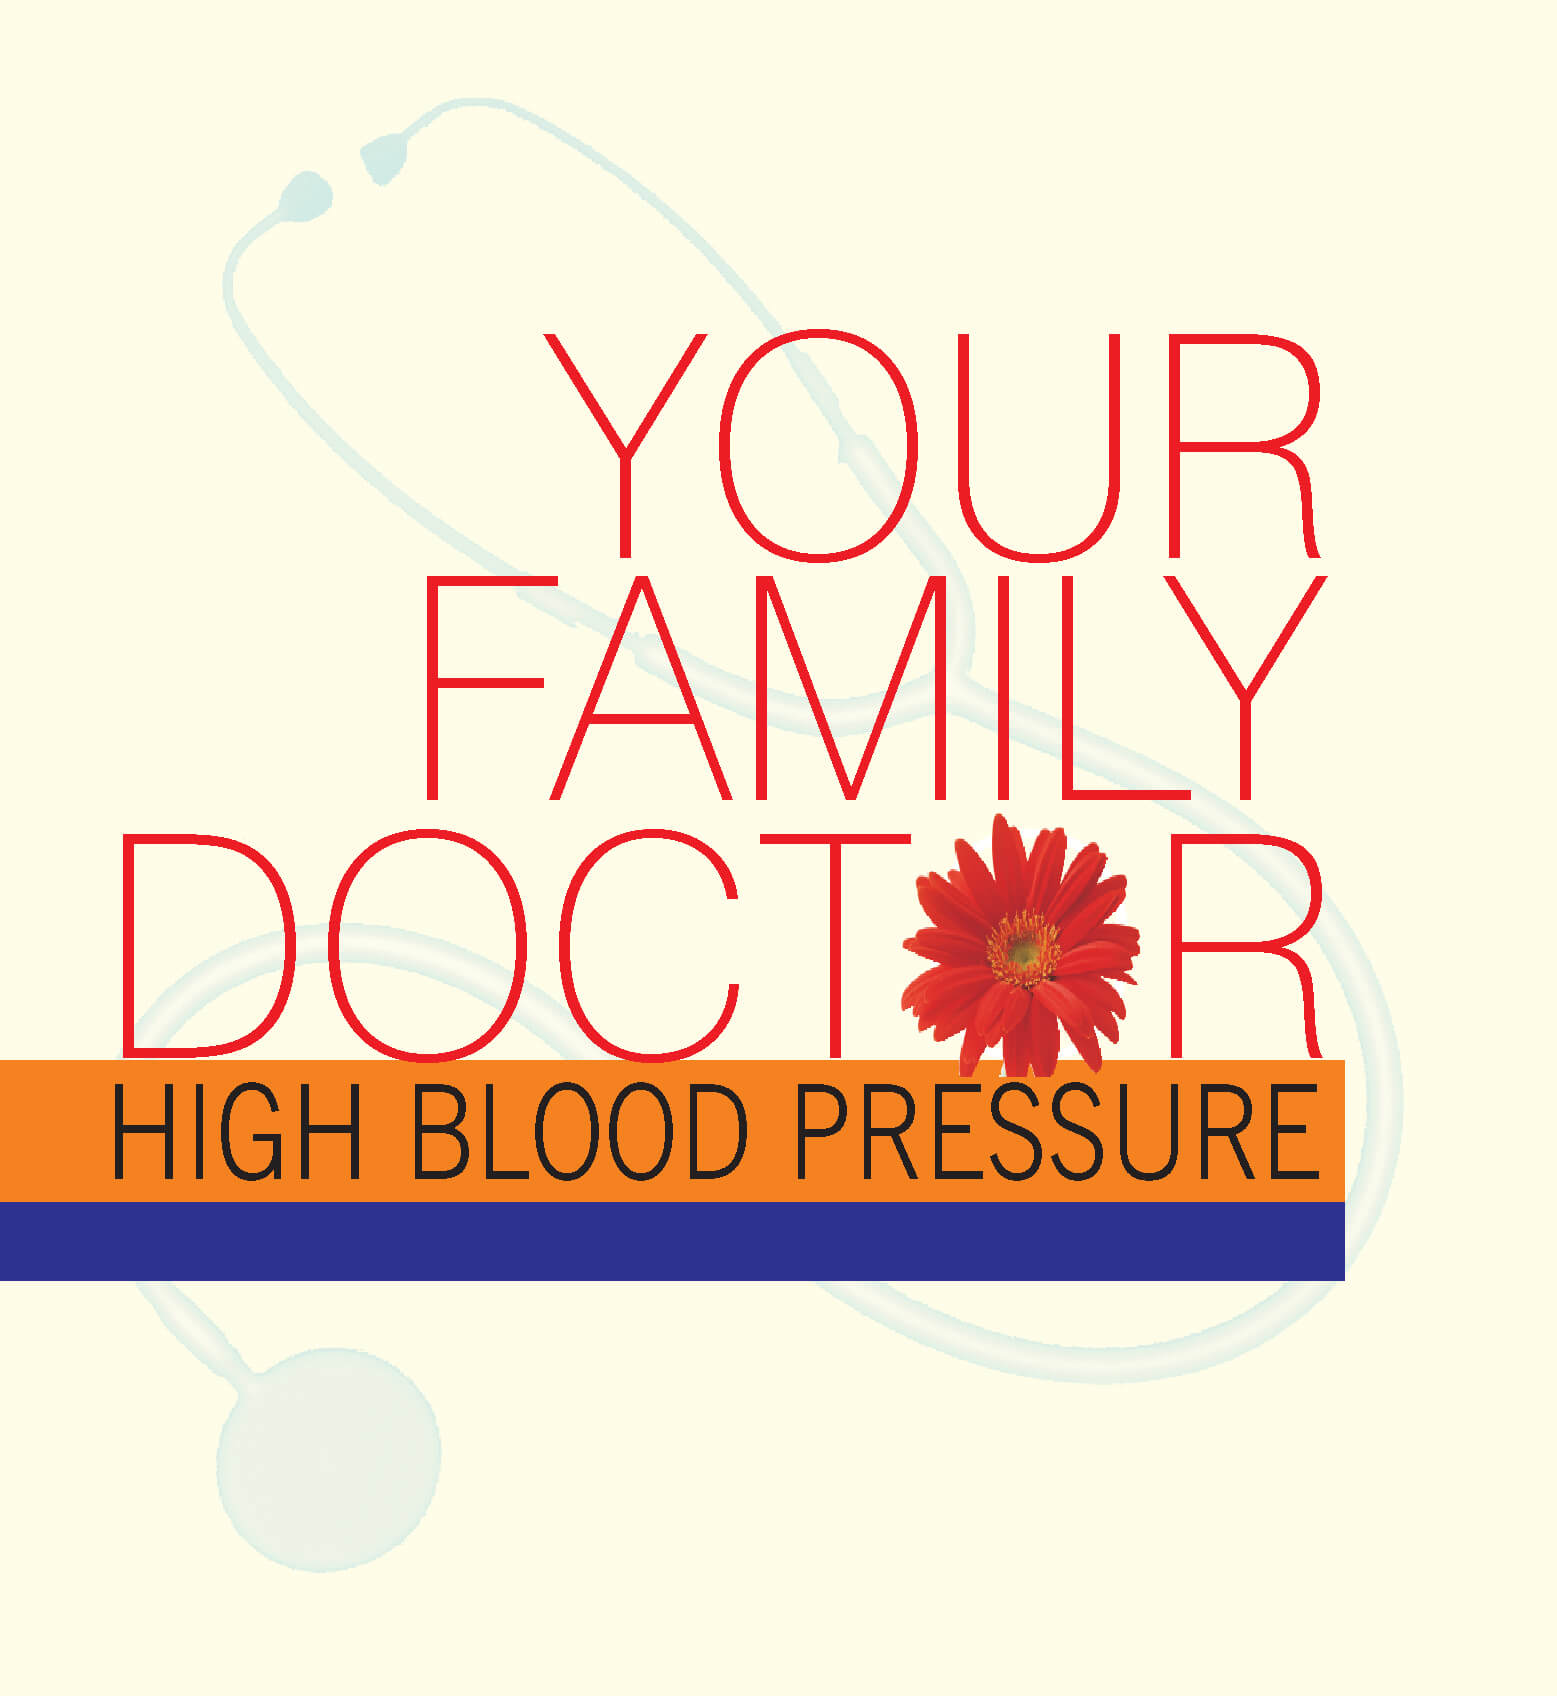 High Blood Pressure: Your Family Doctor